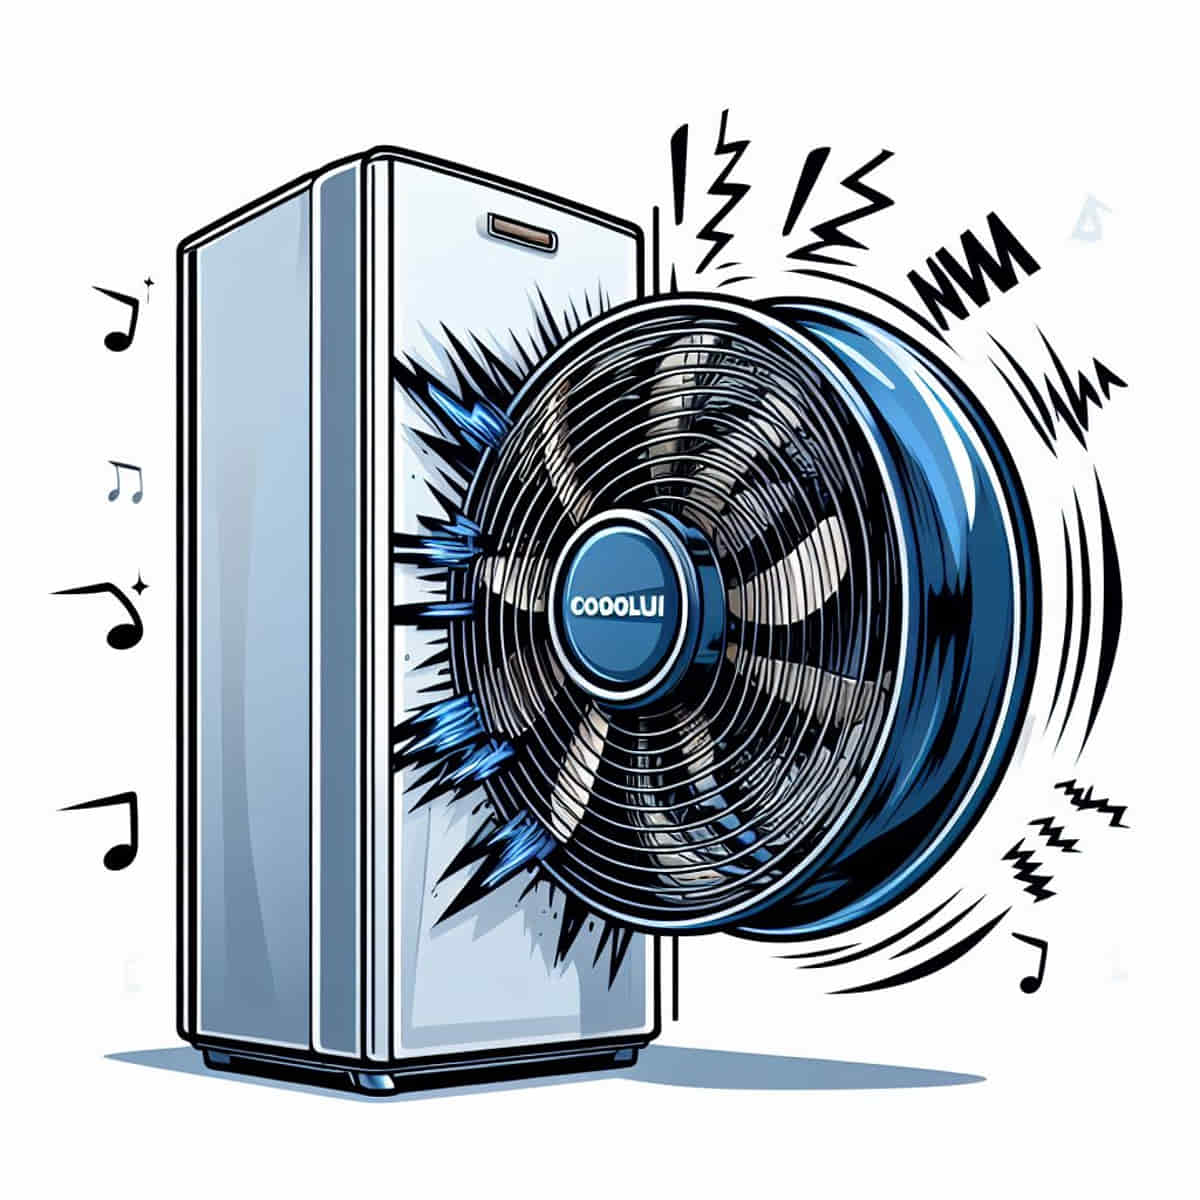 Why is my Cooluli Concord fridge fan too loud